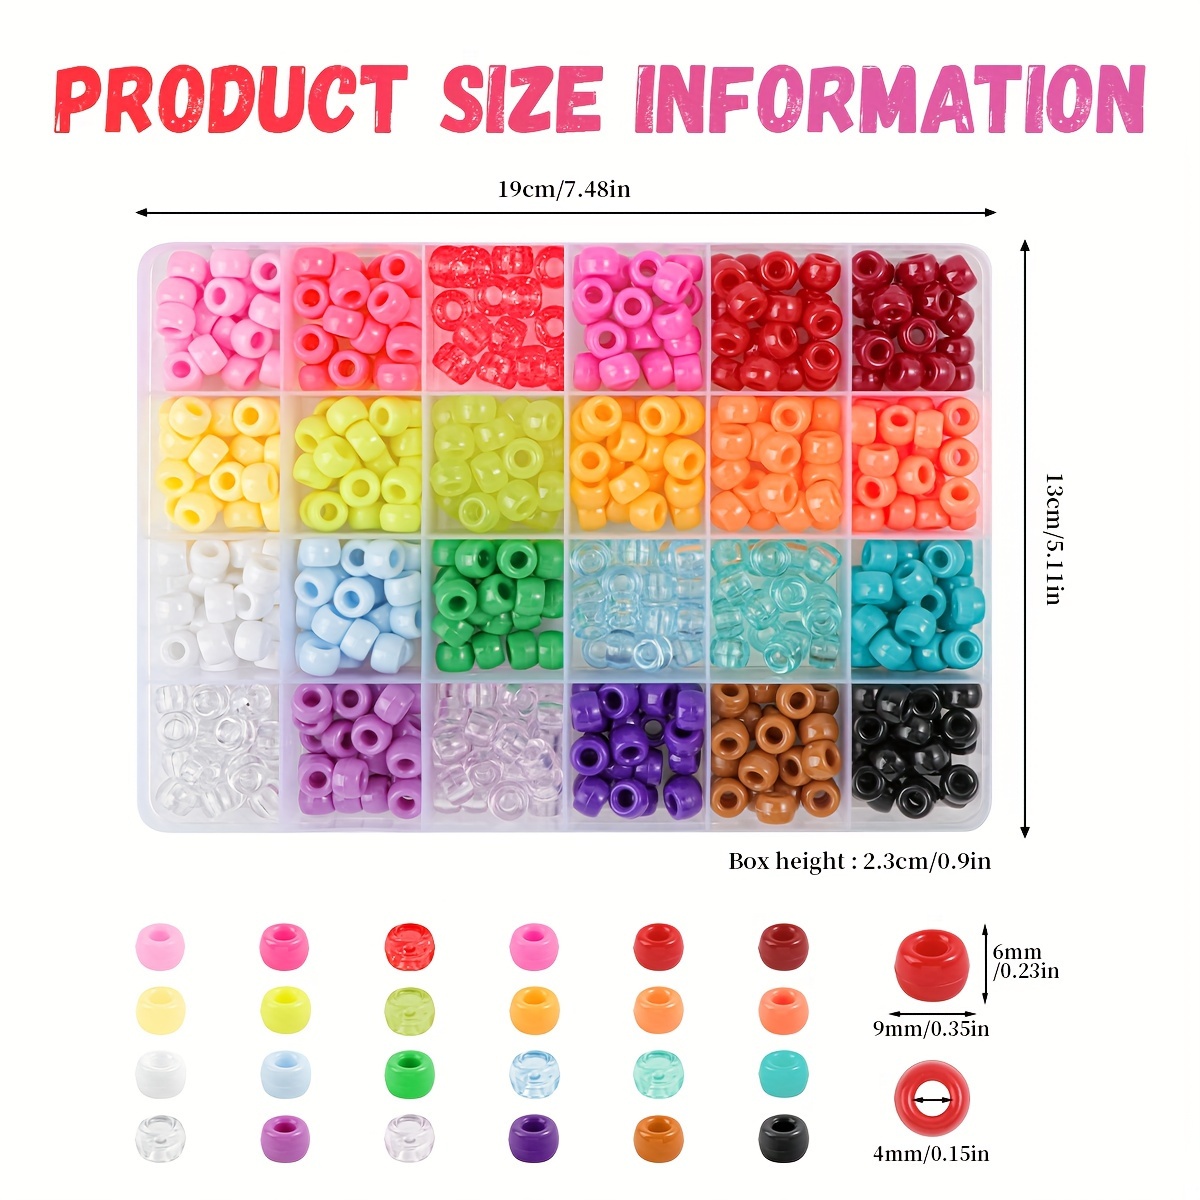  Pony Beads for Bracelet Making Kit, Rainbow Kandi Beads for  Jewelry Making DIY Crafts School Gift Hair Beads for Hair Braids with  Rubber Band and Hair Beader